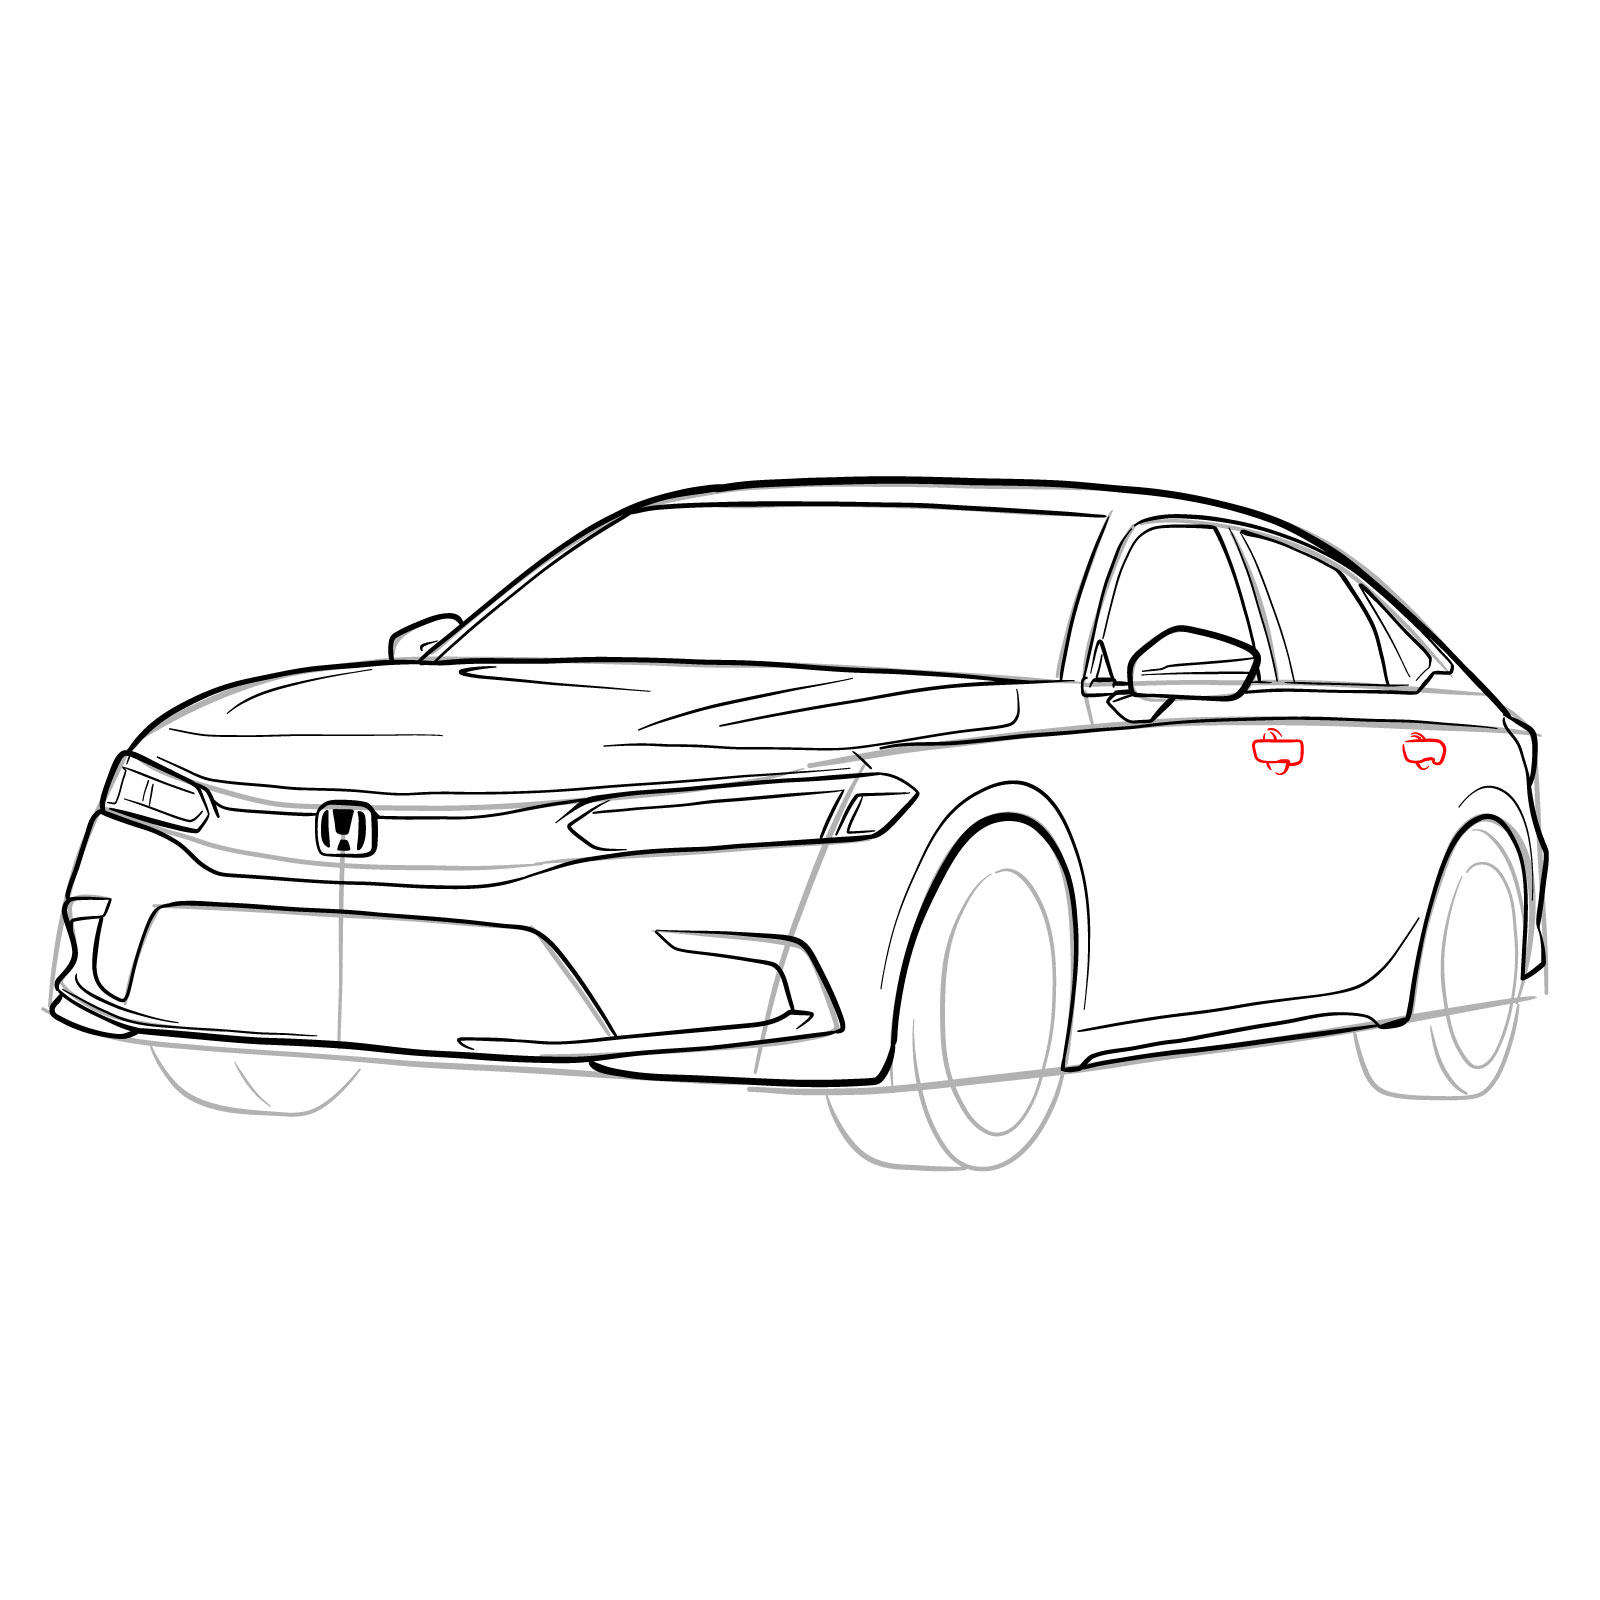 How to draw a 2022 Honda Civic - step 25